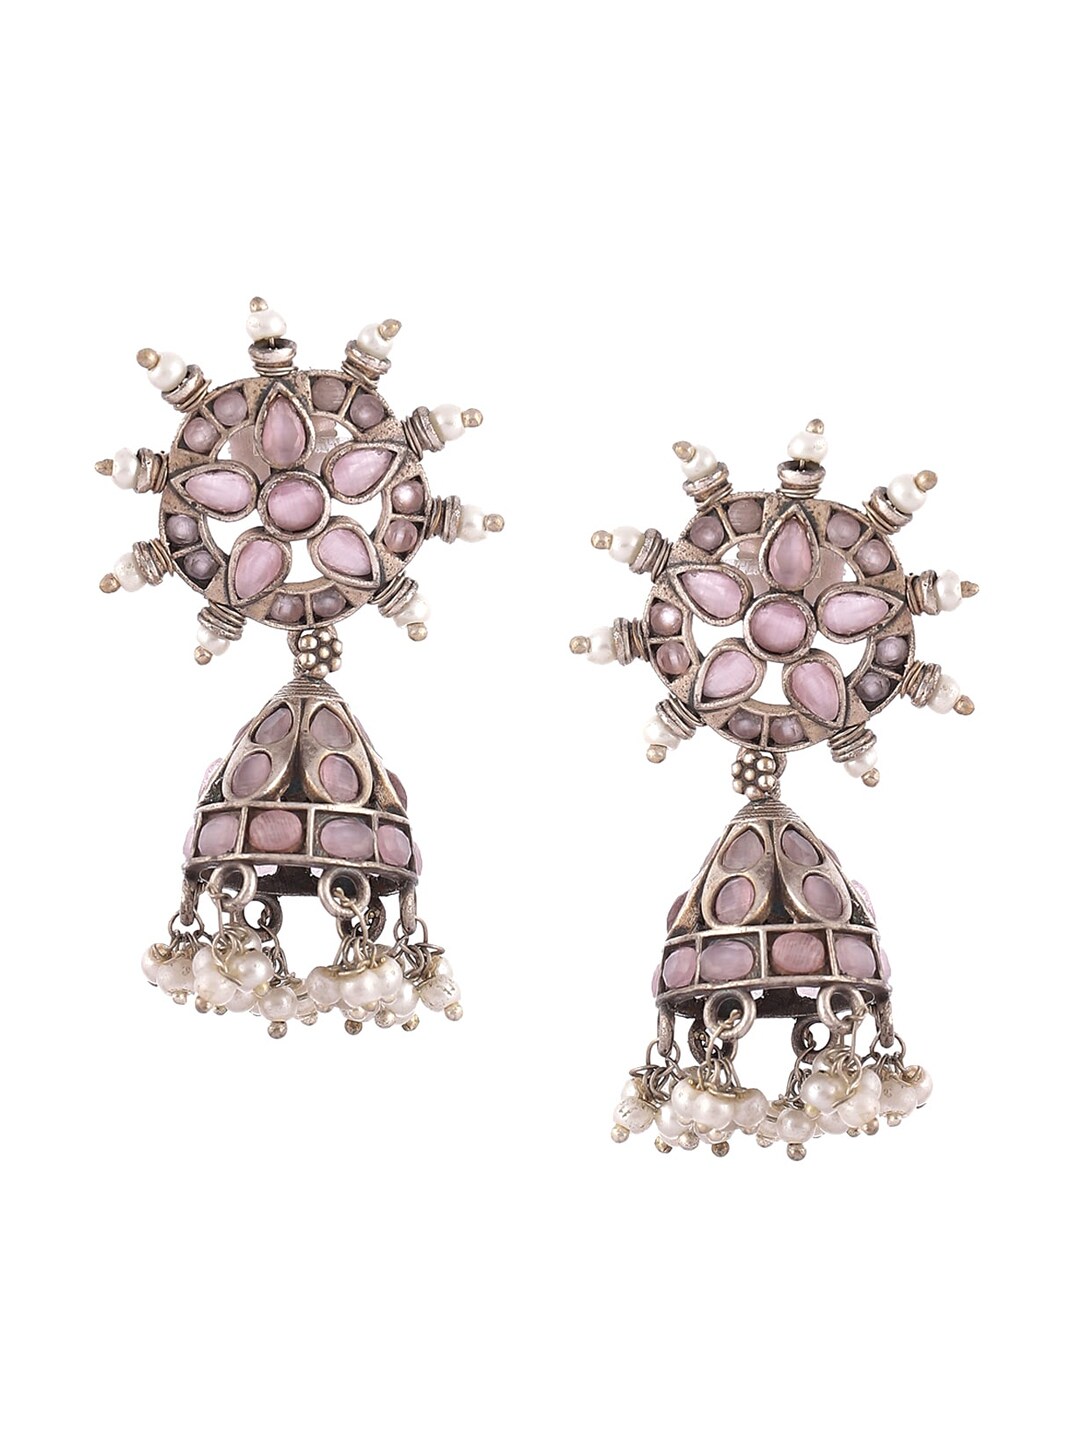 Biba Gold-Toned & Lavender Dome Shaped Jhumkas Earrings Price in India